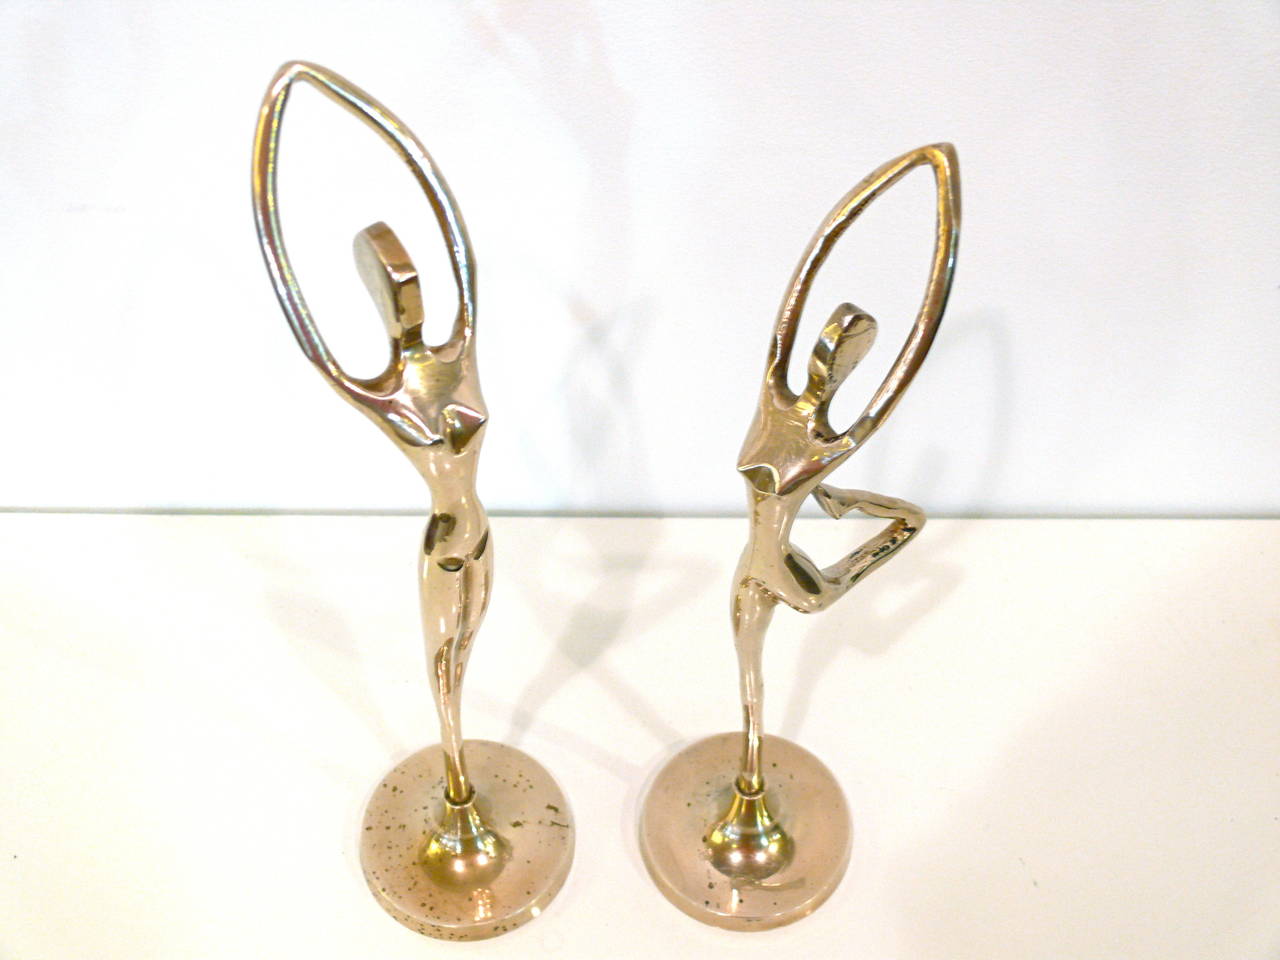 20th Century Pair of Small Mid-Century Polished Brass Sculptural Dancers